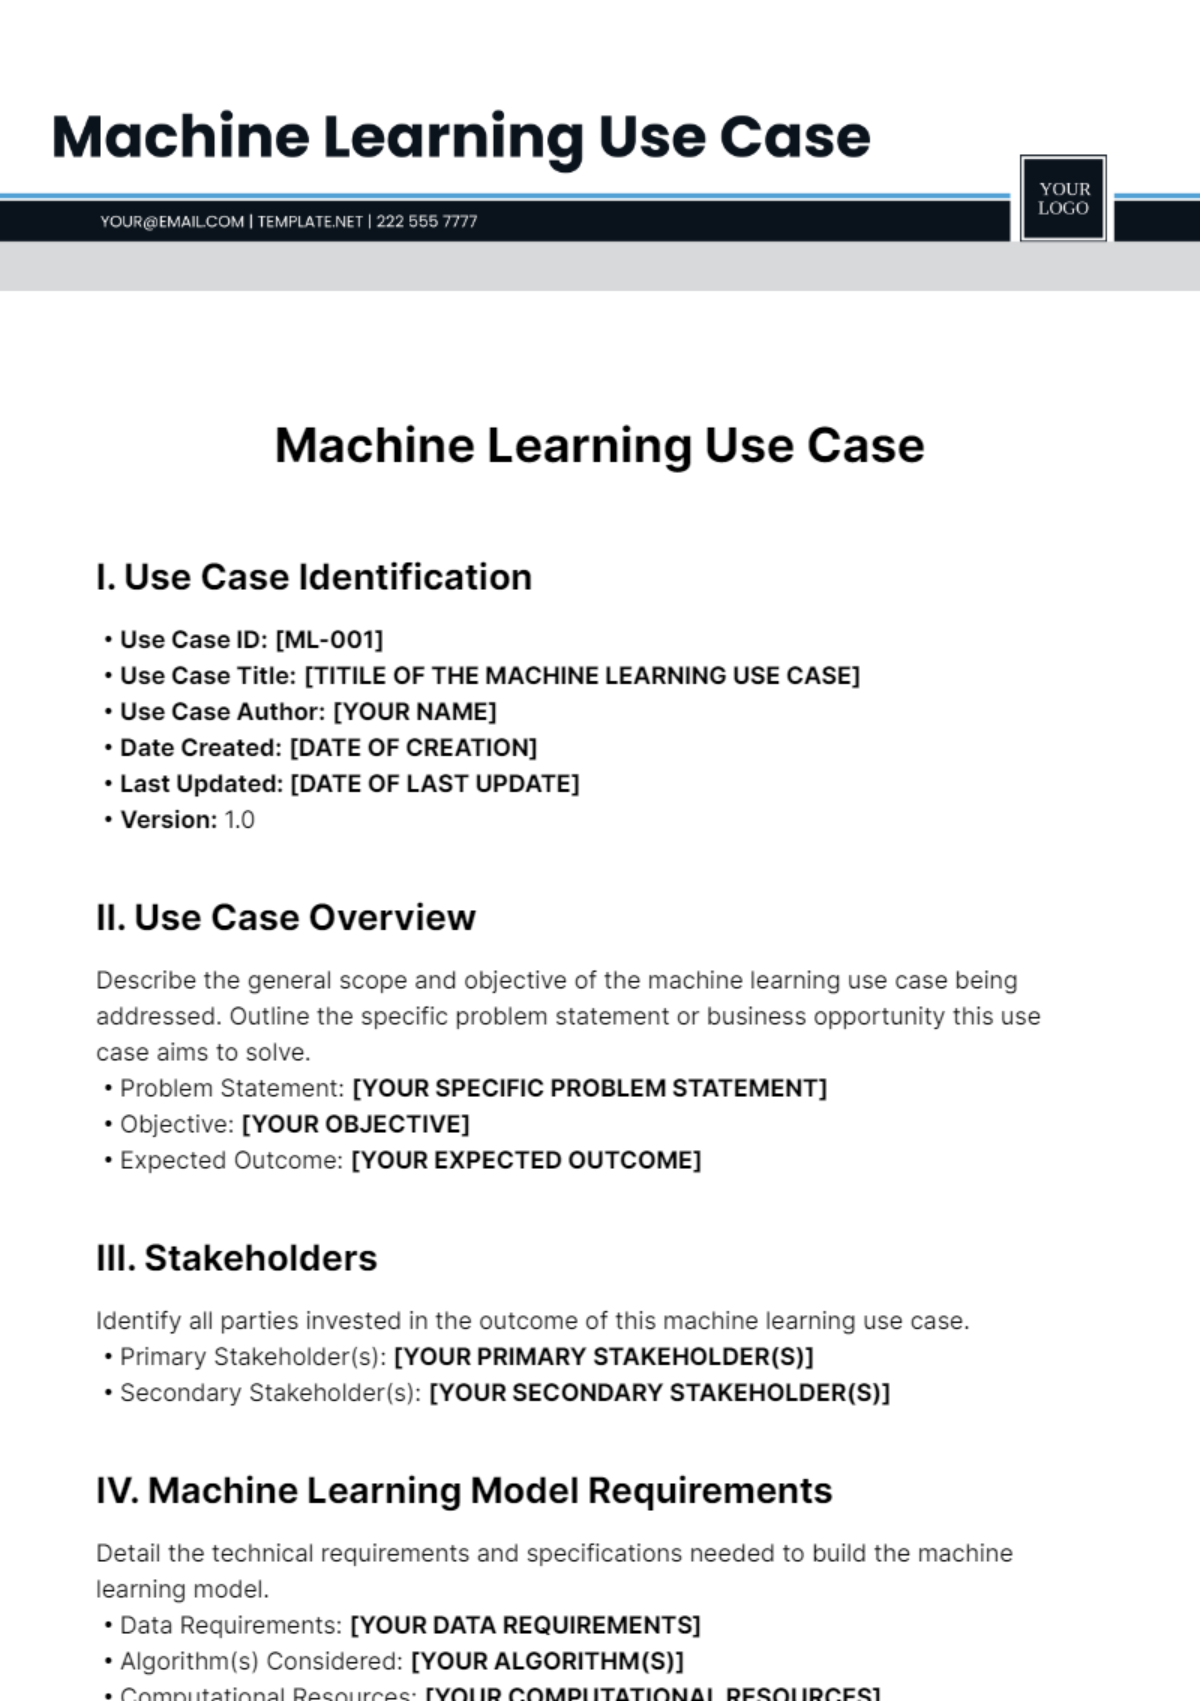 Machine Learning Use Case Template